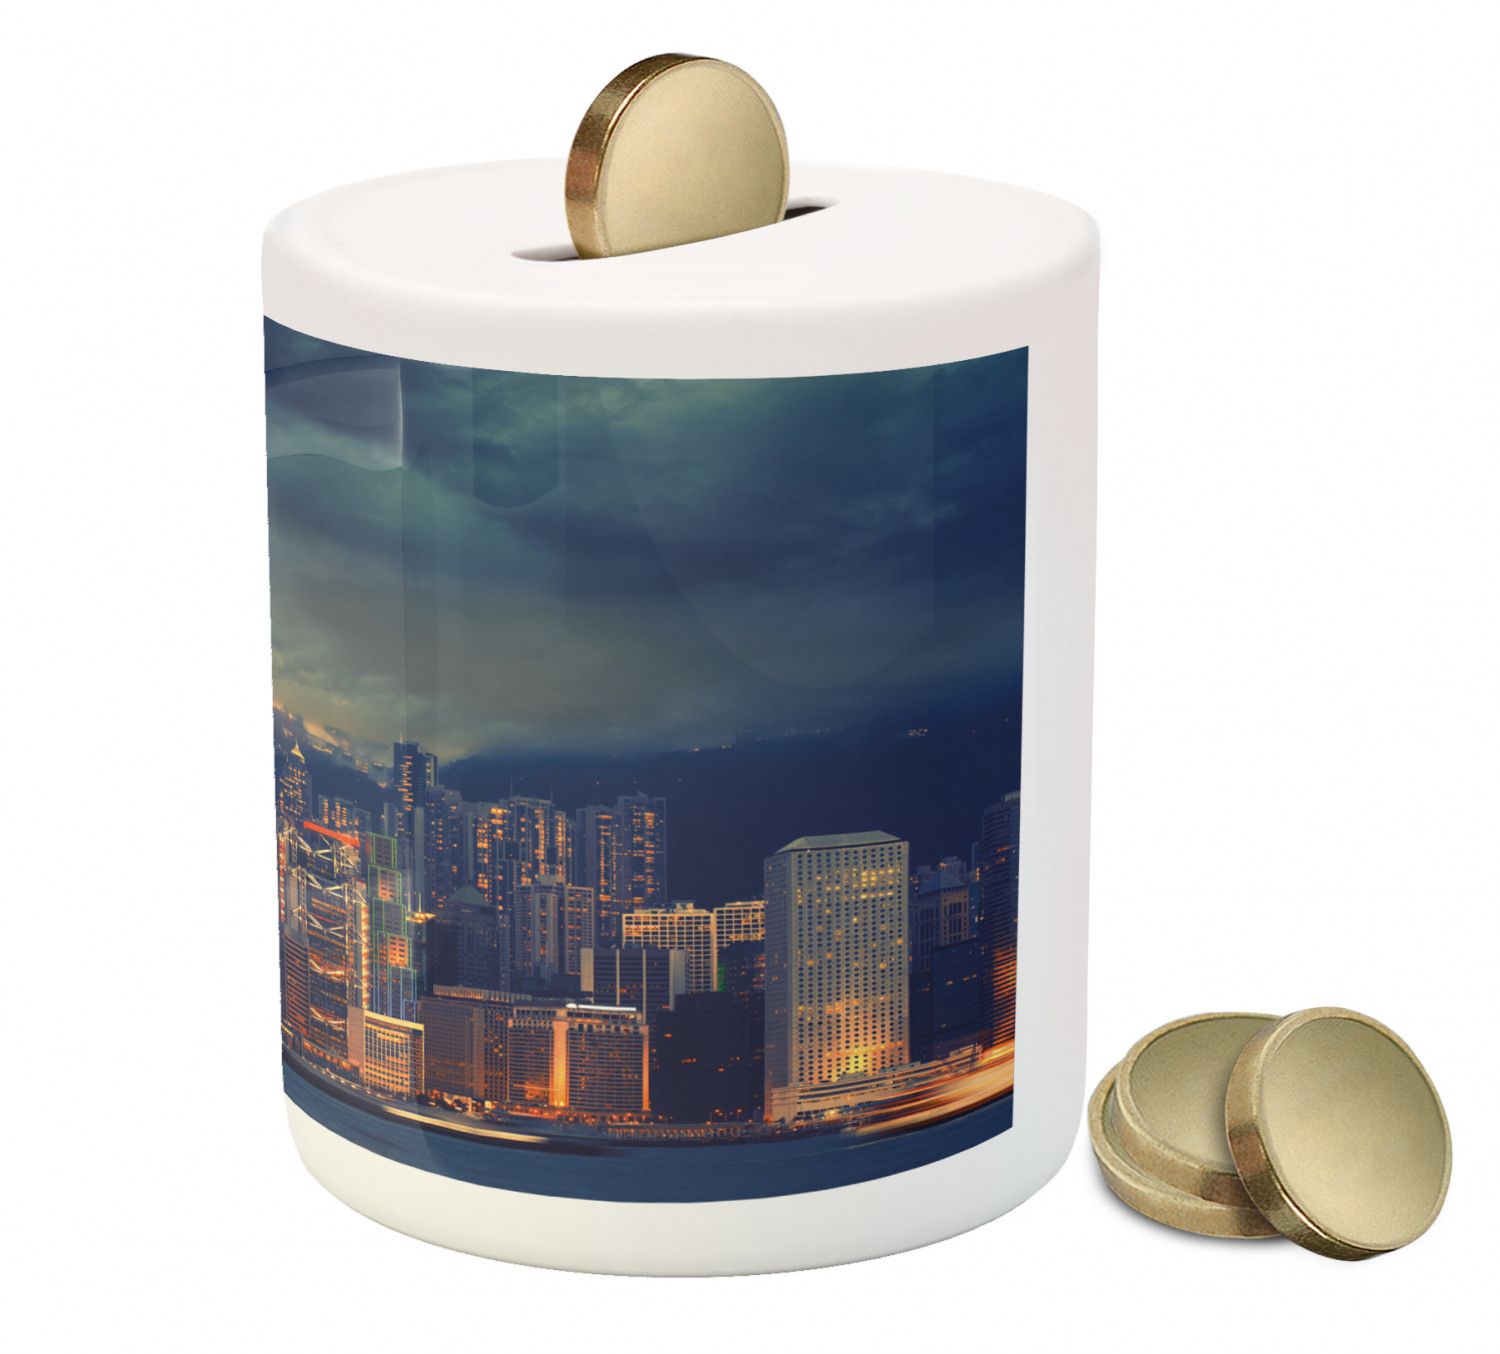 Cityscape Piggy Bank, Hong Kong Cityscape Stormy Weather Dark Cloudy Sky Waterfront Port Dramatic View, Ceramic Coin Bank Money Box for Cash Saving, 3.6" X 3.2", Multicolor, by Ambesonne - image 3 of 4